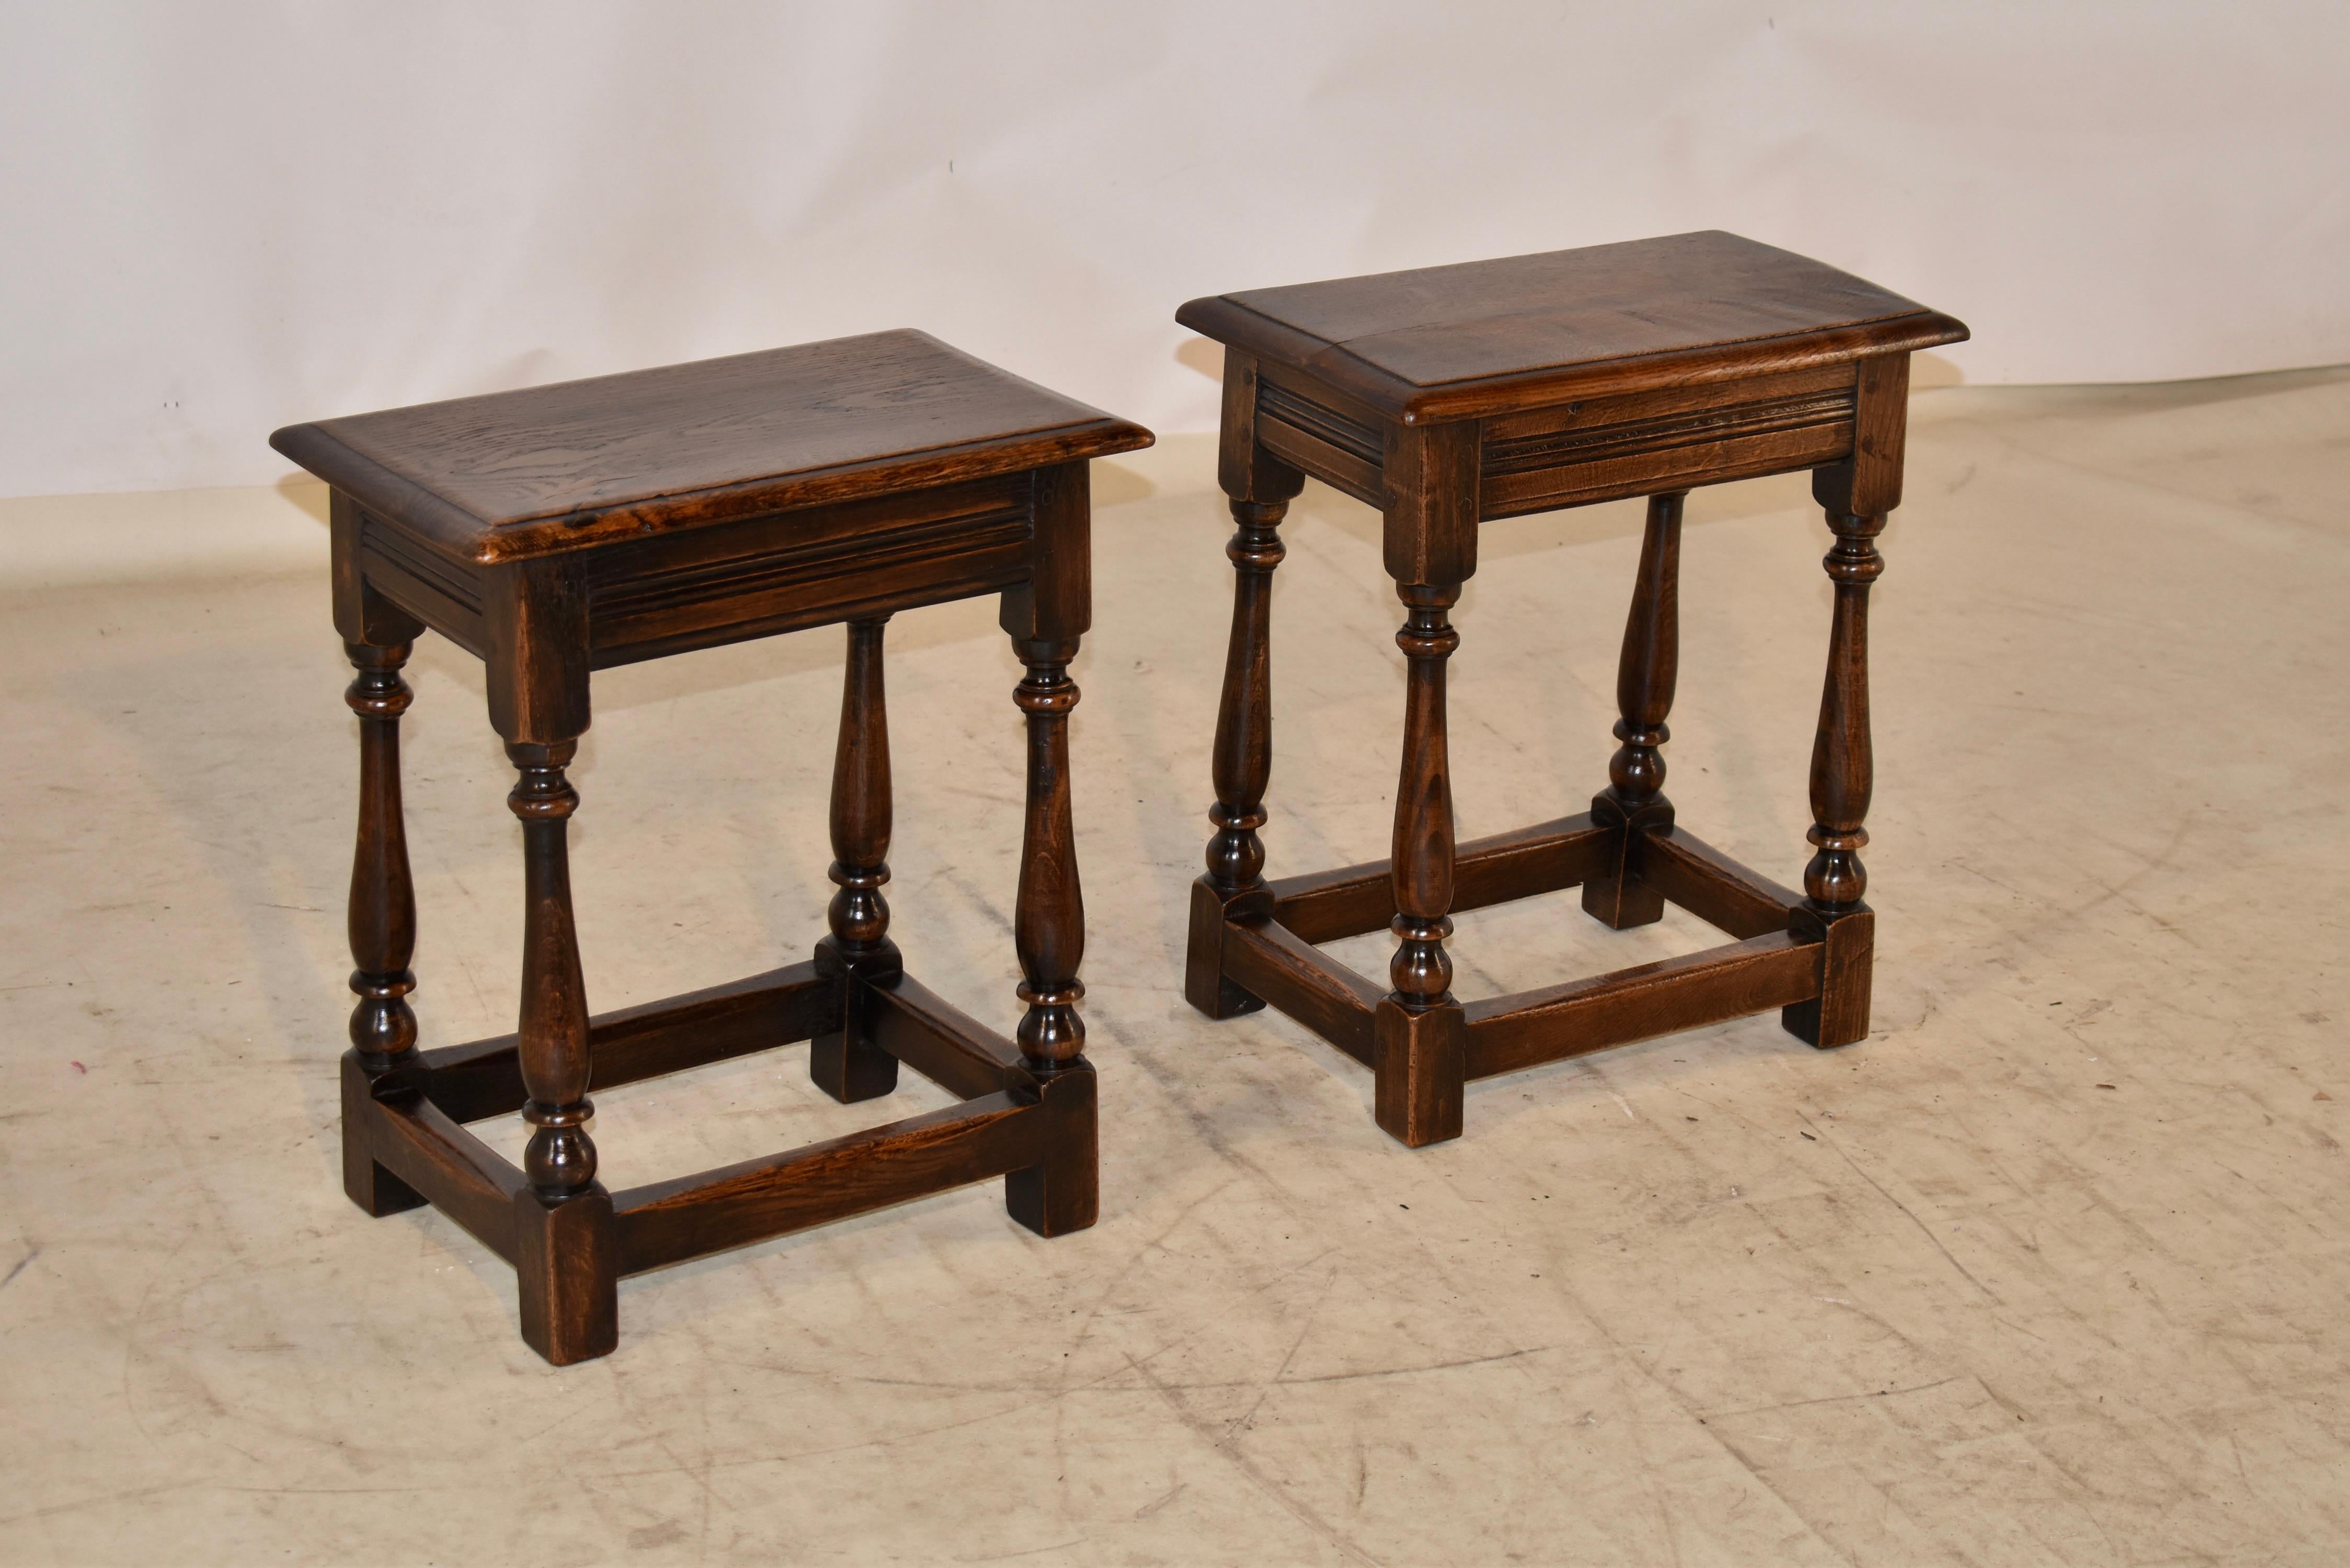 Pair of 19th century oak joint stools from England. The tops are nicely grained and have beveled edges, following down to routed aprons and supported on hand turned legs, joined by simple stretchers. These have a wonderful original patina in a warm